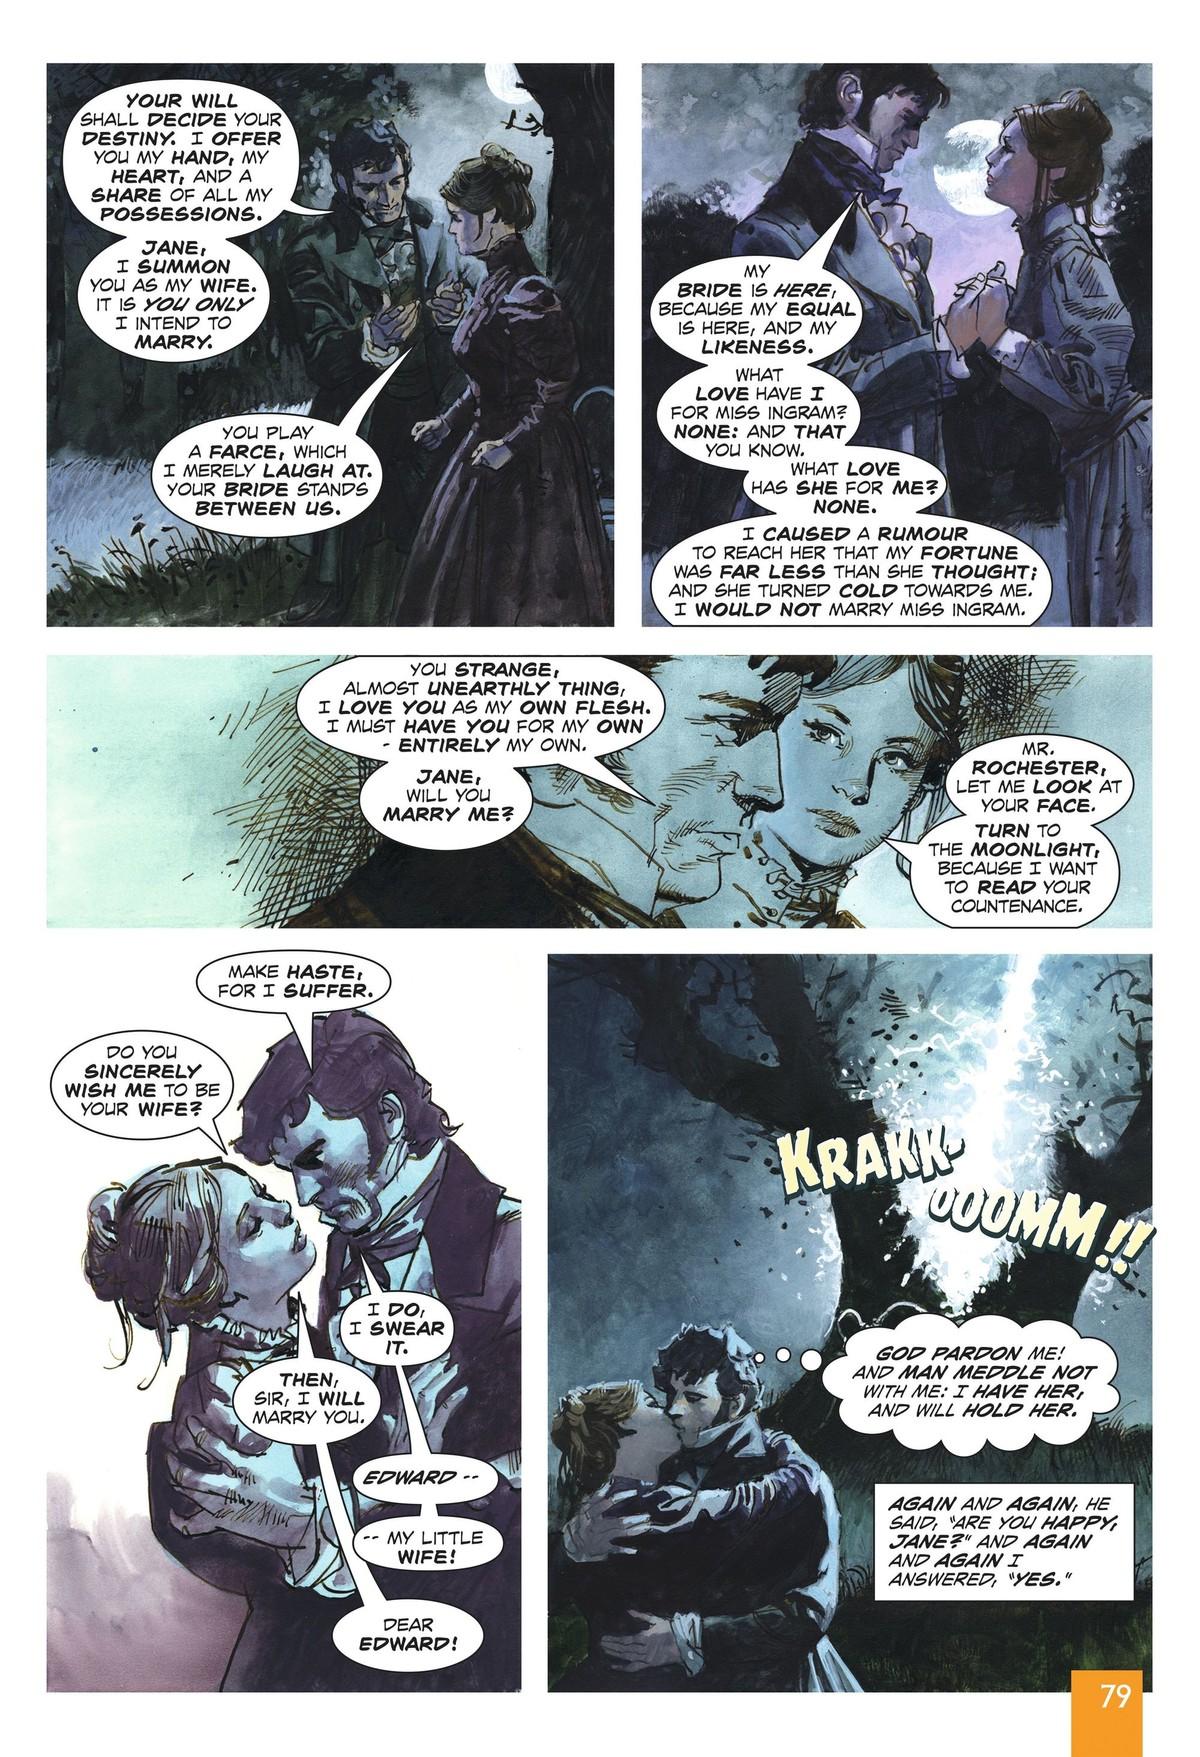 Jane Eyre The Graphic Novel